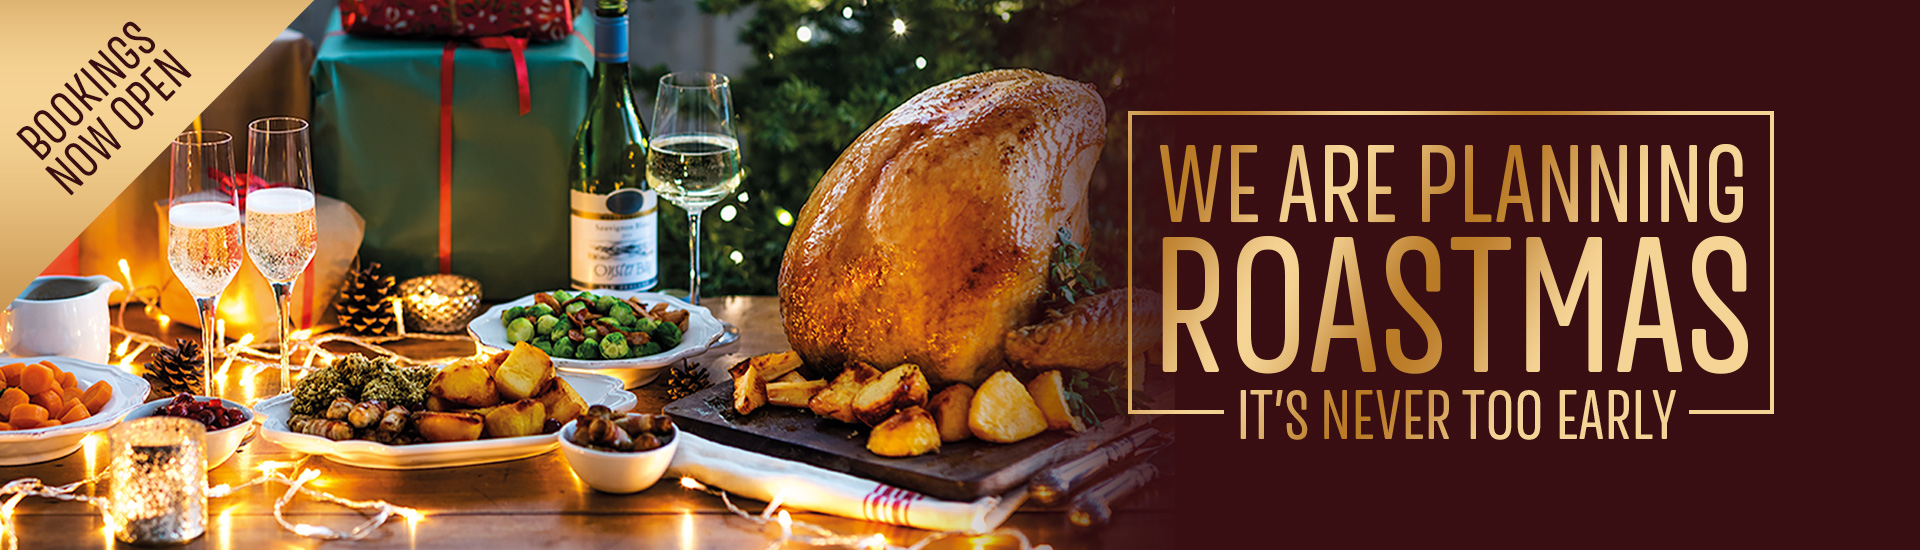 Christmas 2022 at your local Toby Carvery Wakefield | Home of the Roast